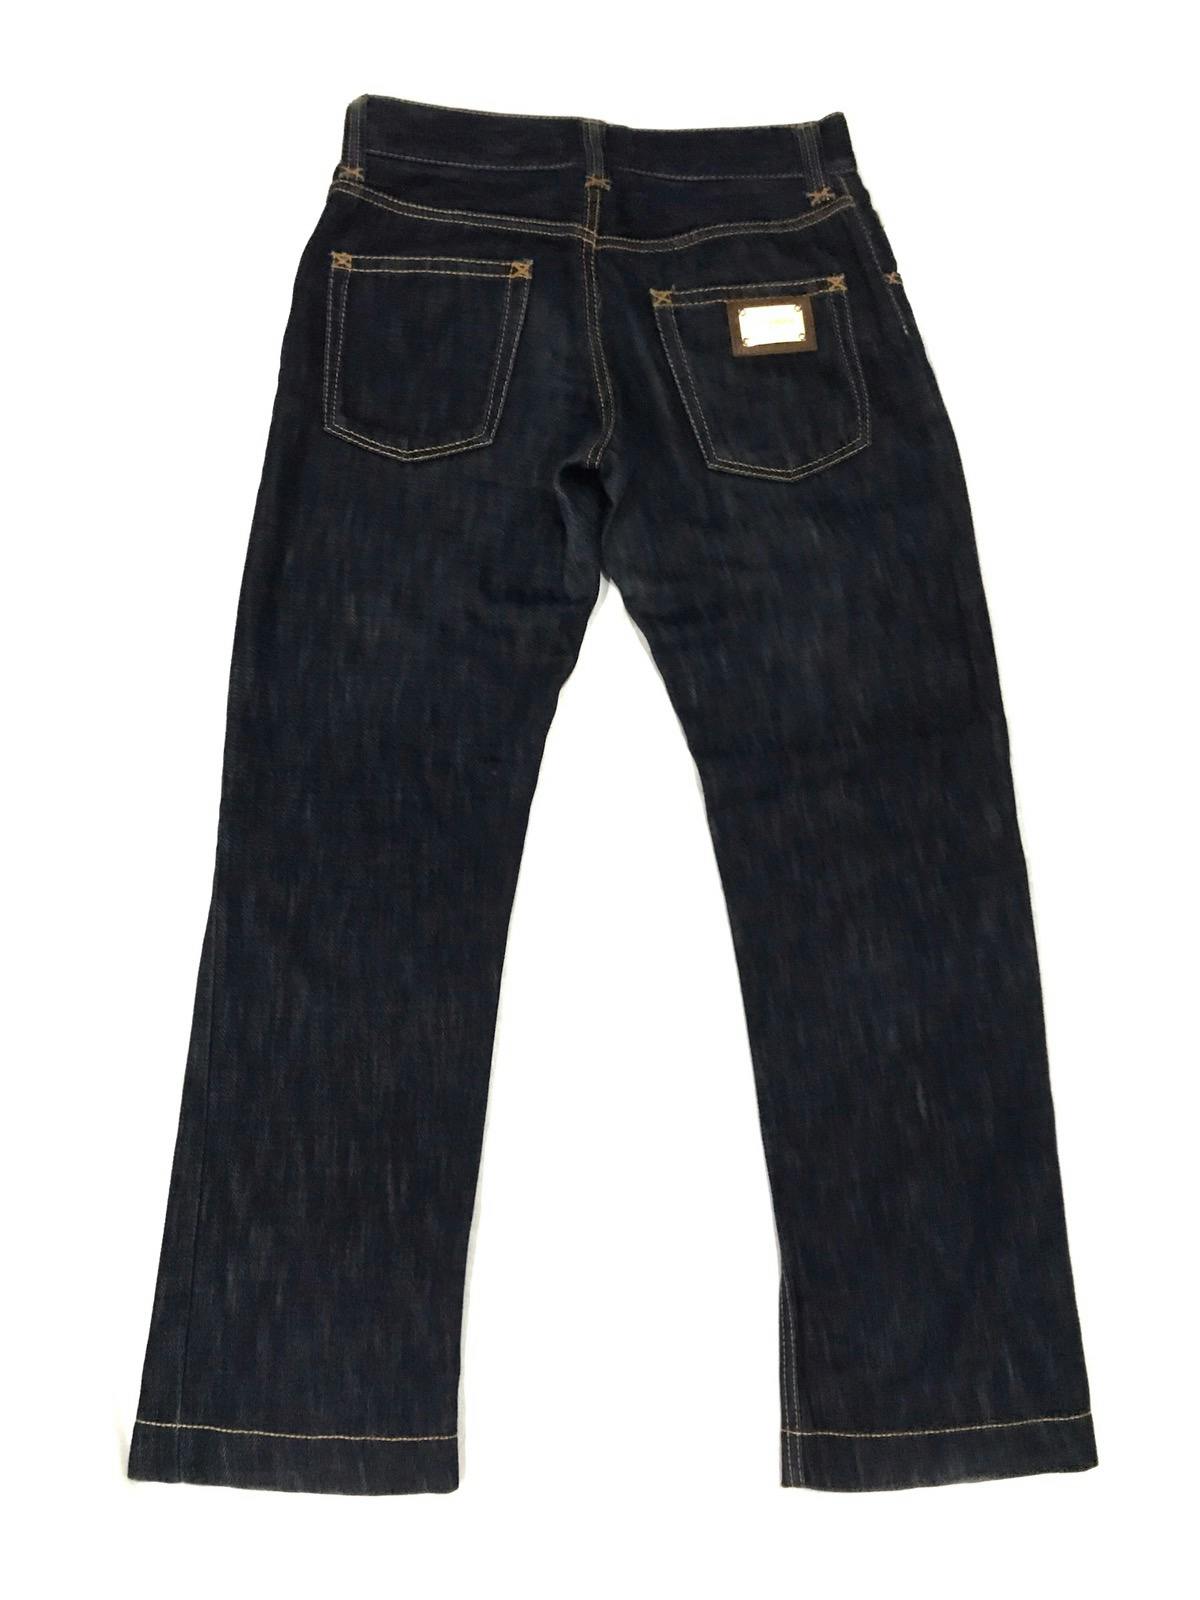 Dolce & Gabanna D&G 17 Loose Denim Jeans Made in Italy 🇮🇹 - 8